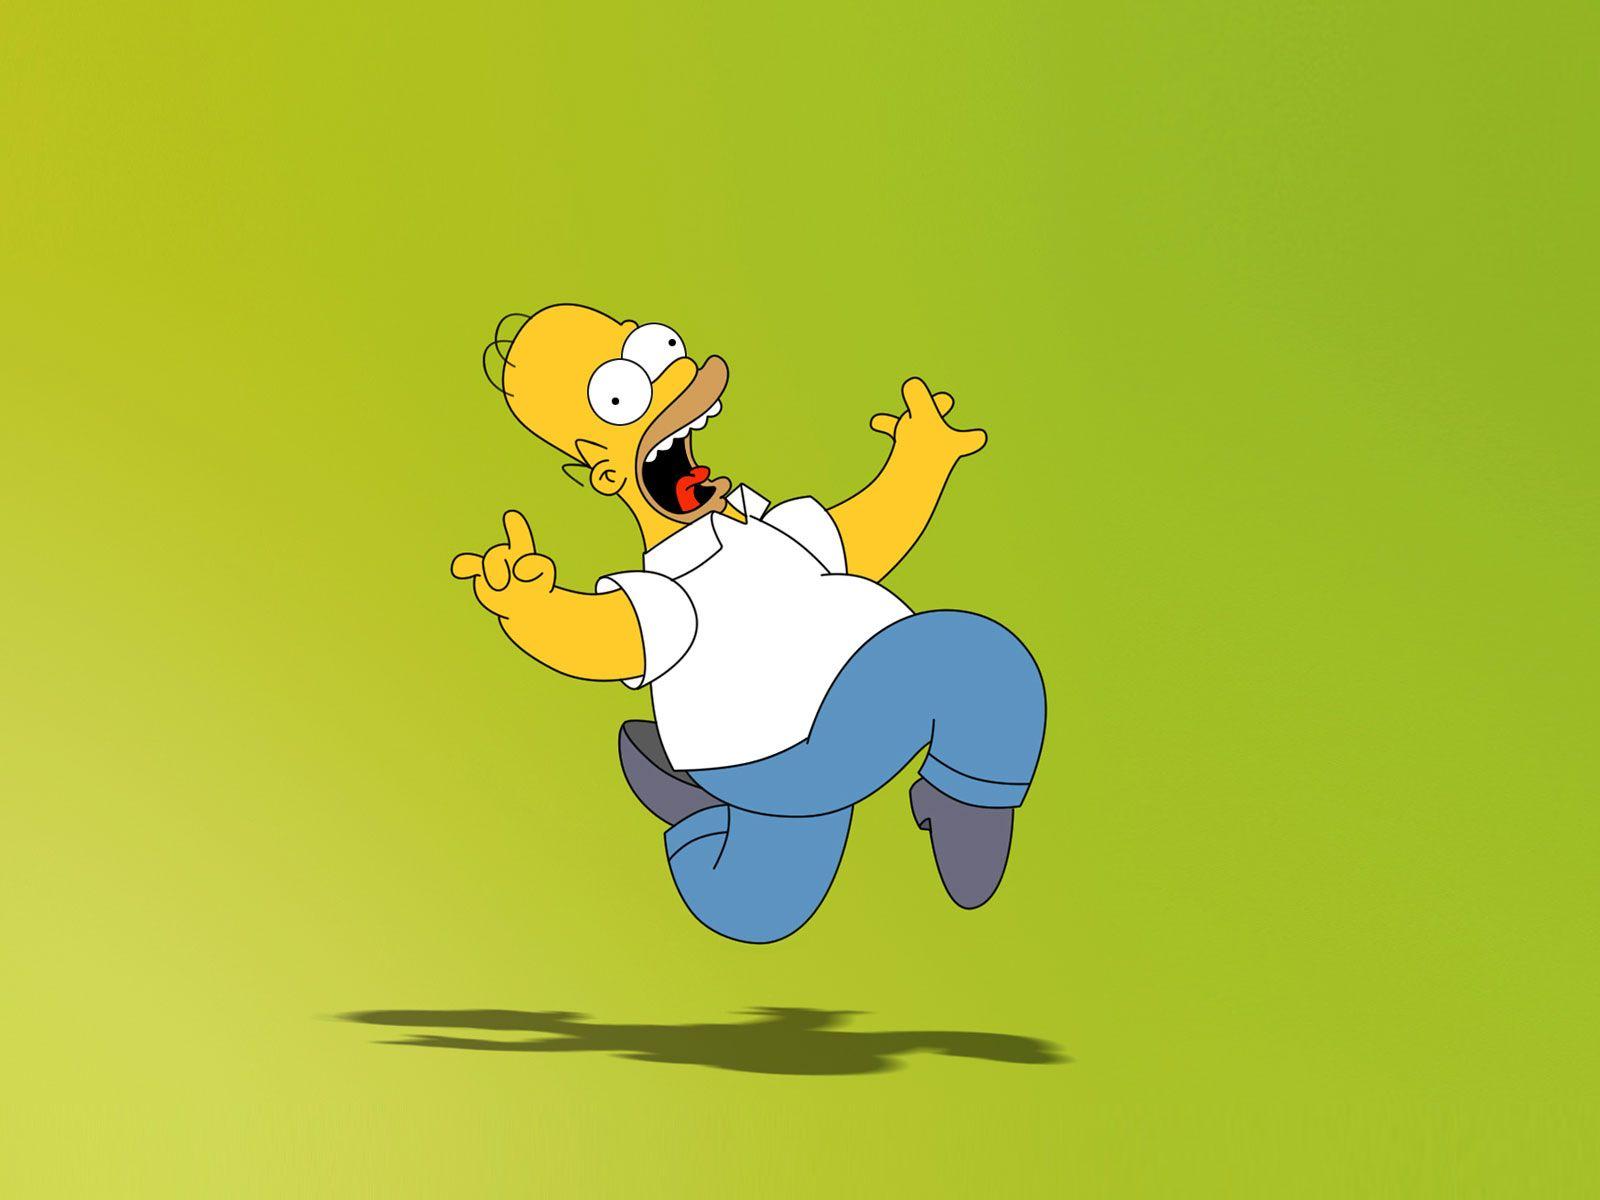 The Simpsons Wallpapers Hd Wallpaper Cave